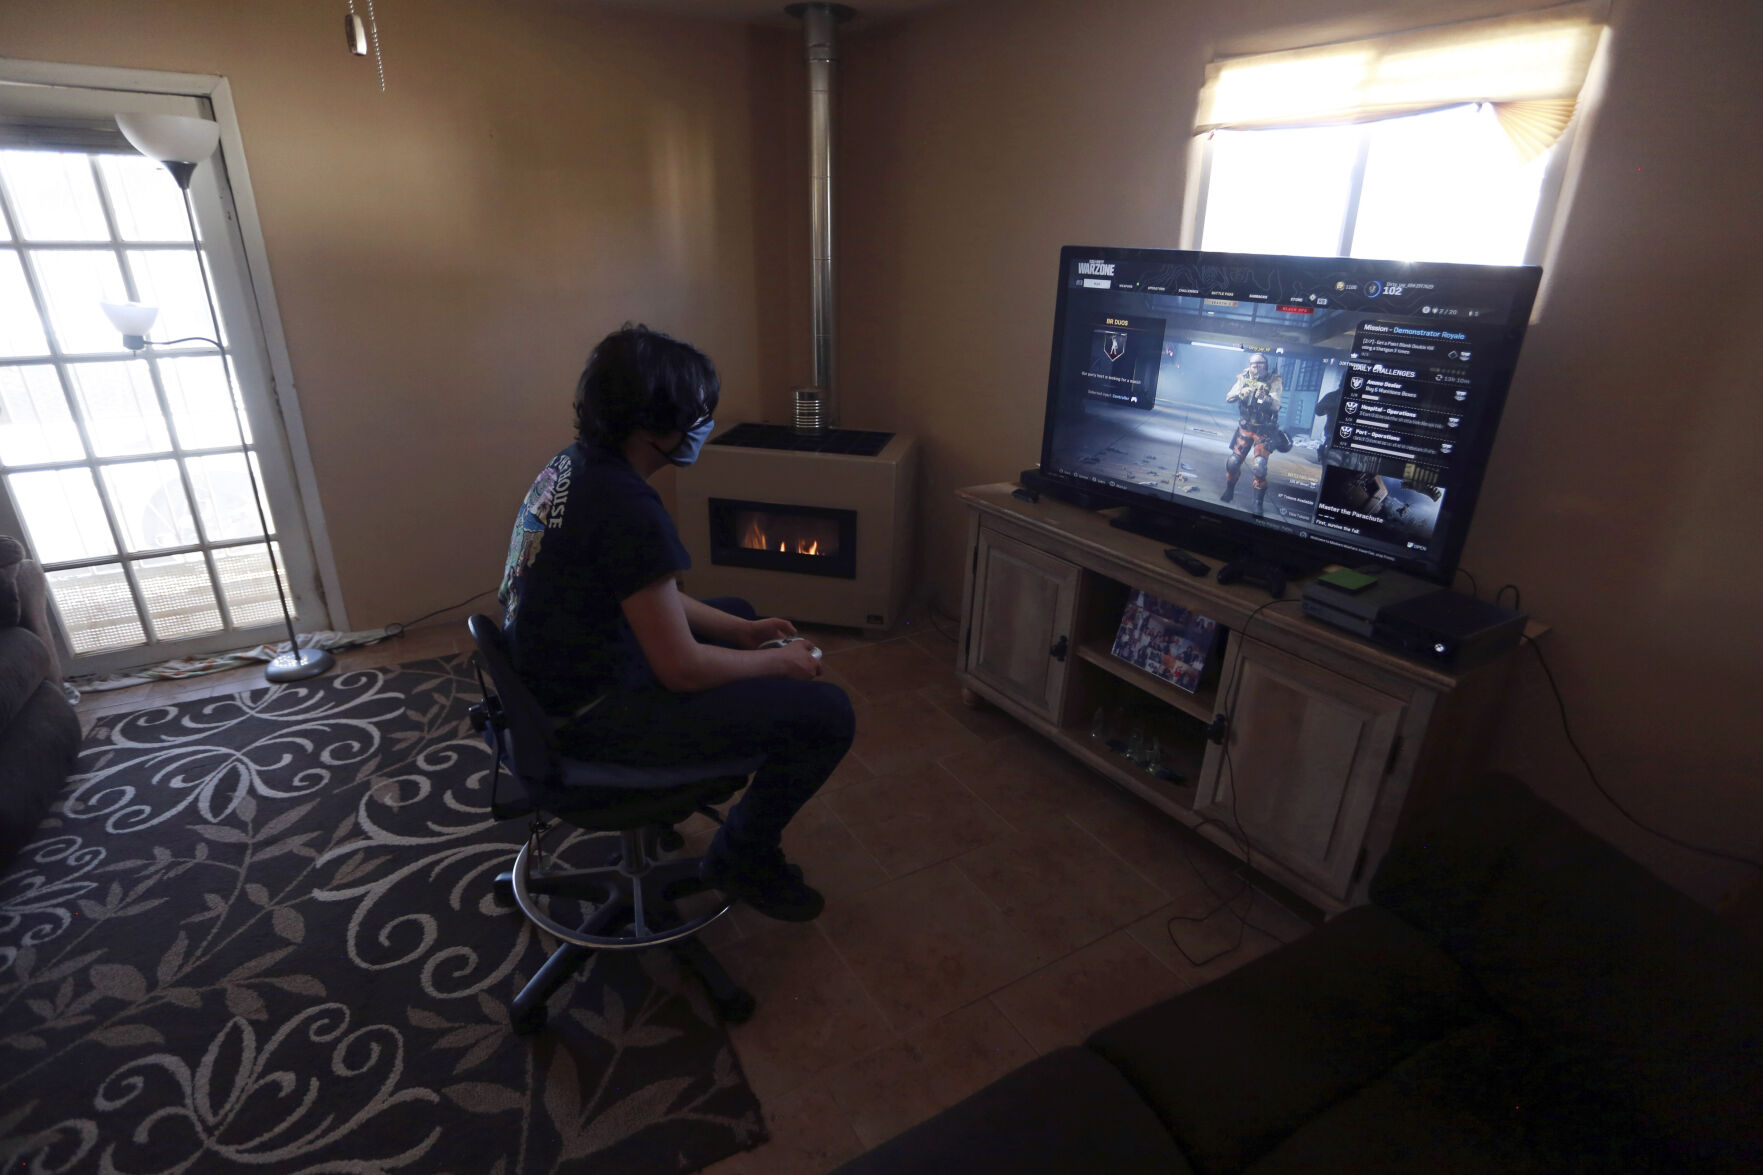 <p>FILE - Javin Lujan Lopez, 17, a senior at Pojoaque High School, plays video games at his house, Feb. 22, 2021, in Española, N.M. In interviews with The Associated Press, close to 50 school leaders, teachers, parents and health officials reflected on decisions to keep students in extended online learning, especially during the spring semester of 2021. (AP Photo/Cedar Attanasio, File)</p>   PHOTO CREDIT: Cedar Attanasio - staff, AP